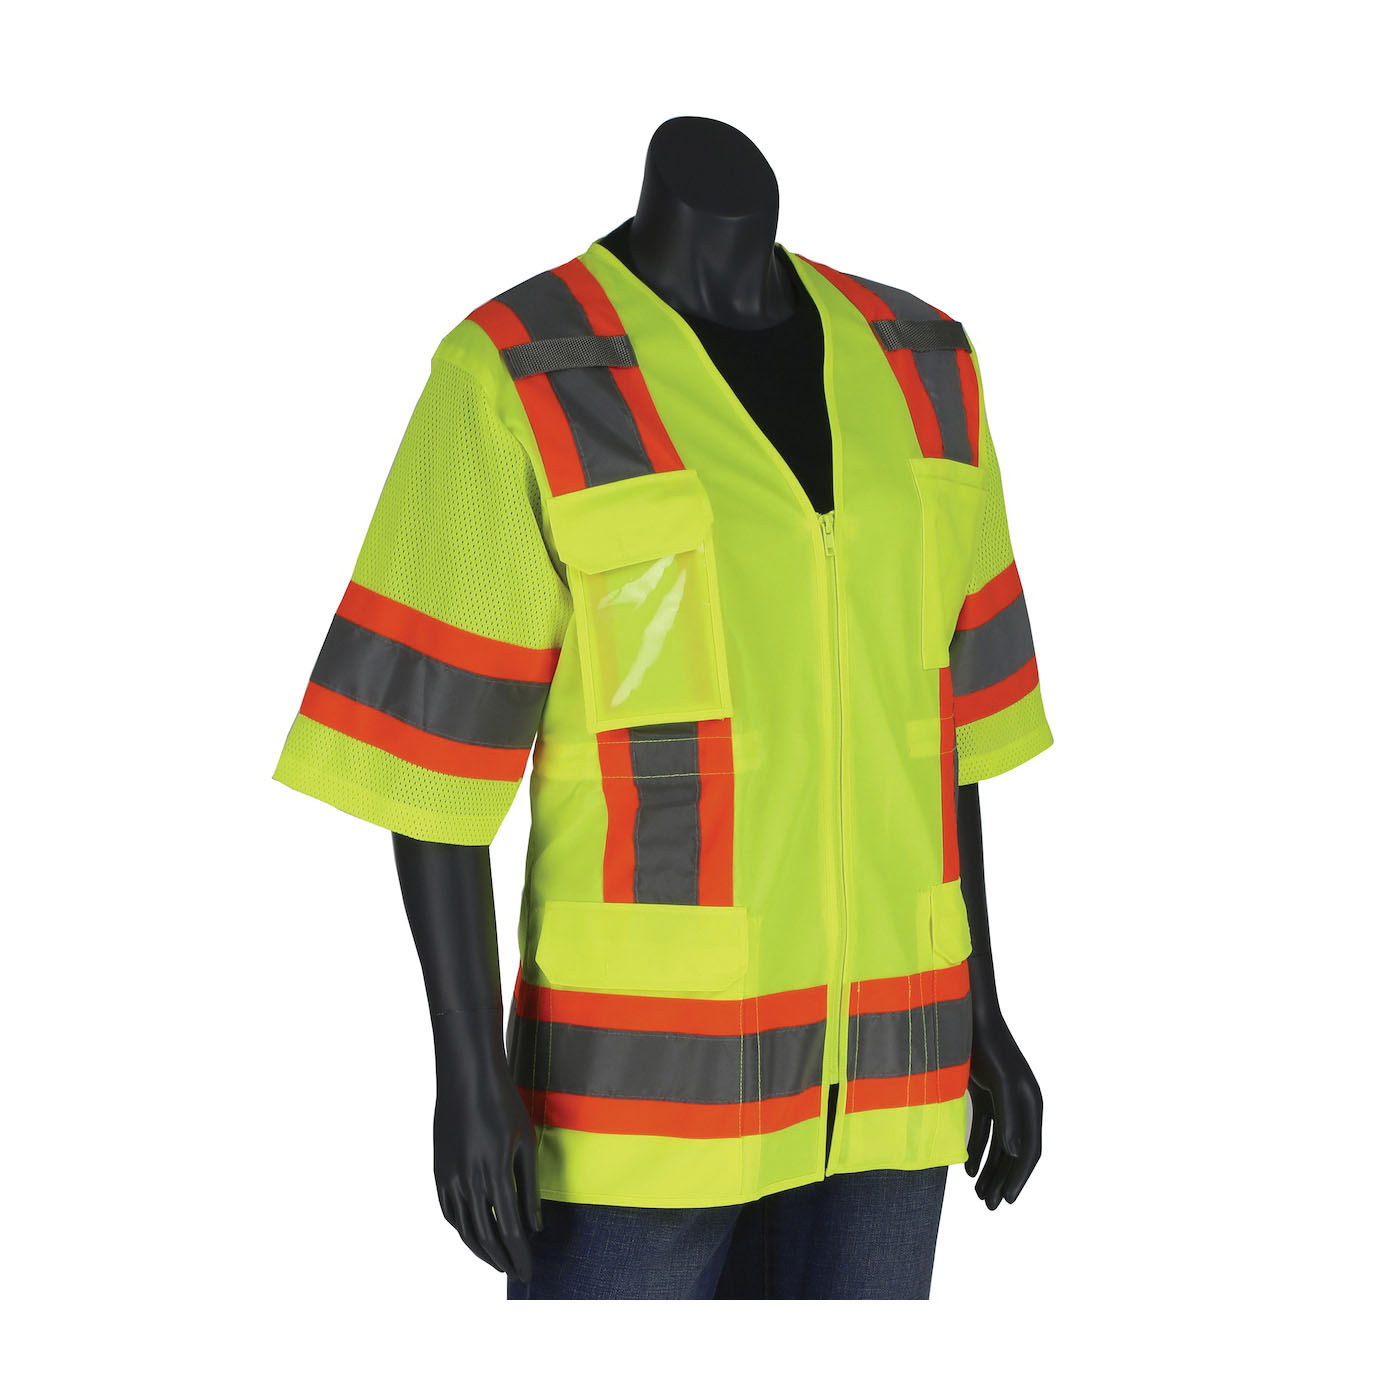 PIP® 303-0513-LY/XL 2-Tone Contoured Surveyor's Vest With Solid Front and Mesh Back, XL, Hi-Vis Yellow, 100% Polyester Mesh/Solid Tricot Knit, Zipper Closure, 11 Pockets, ANSI Class: Type/Class R3